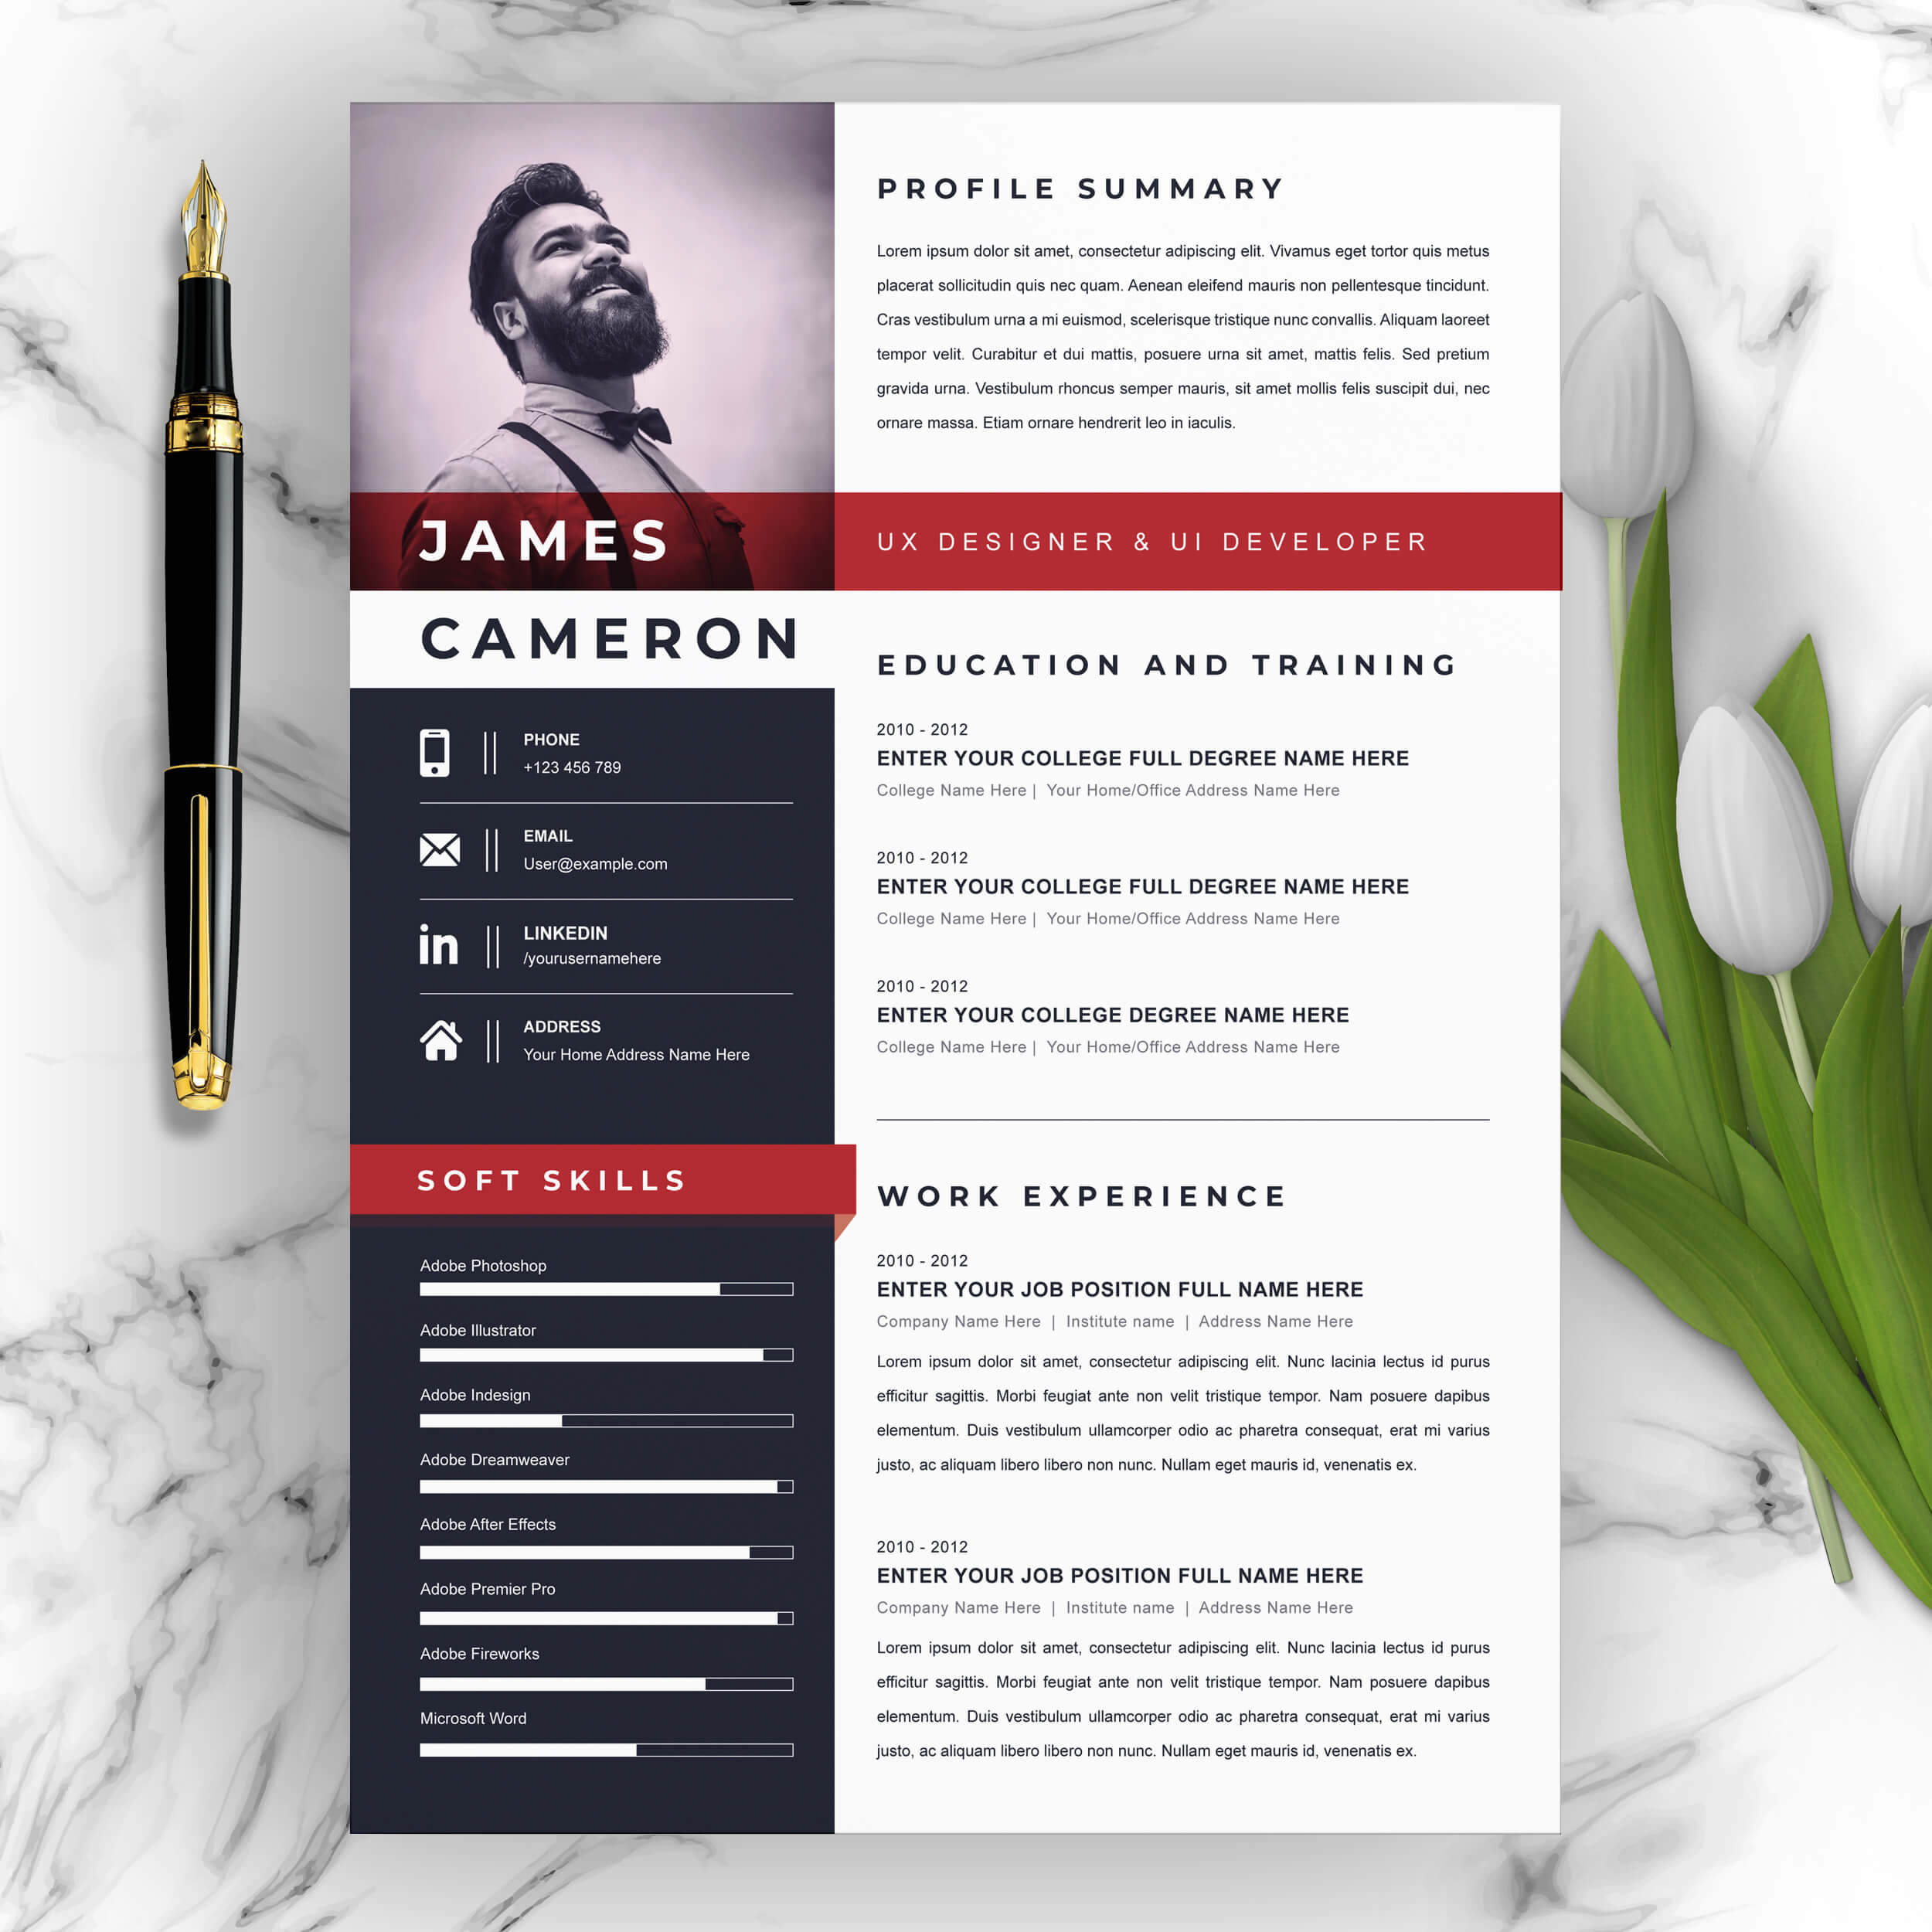 Professional CV or Resume Template | Modern Resume Template cover image.